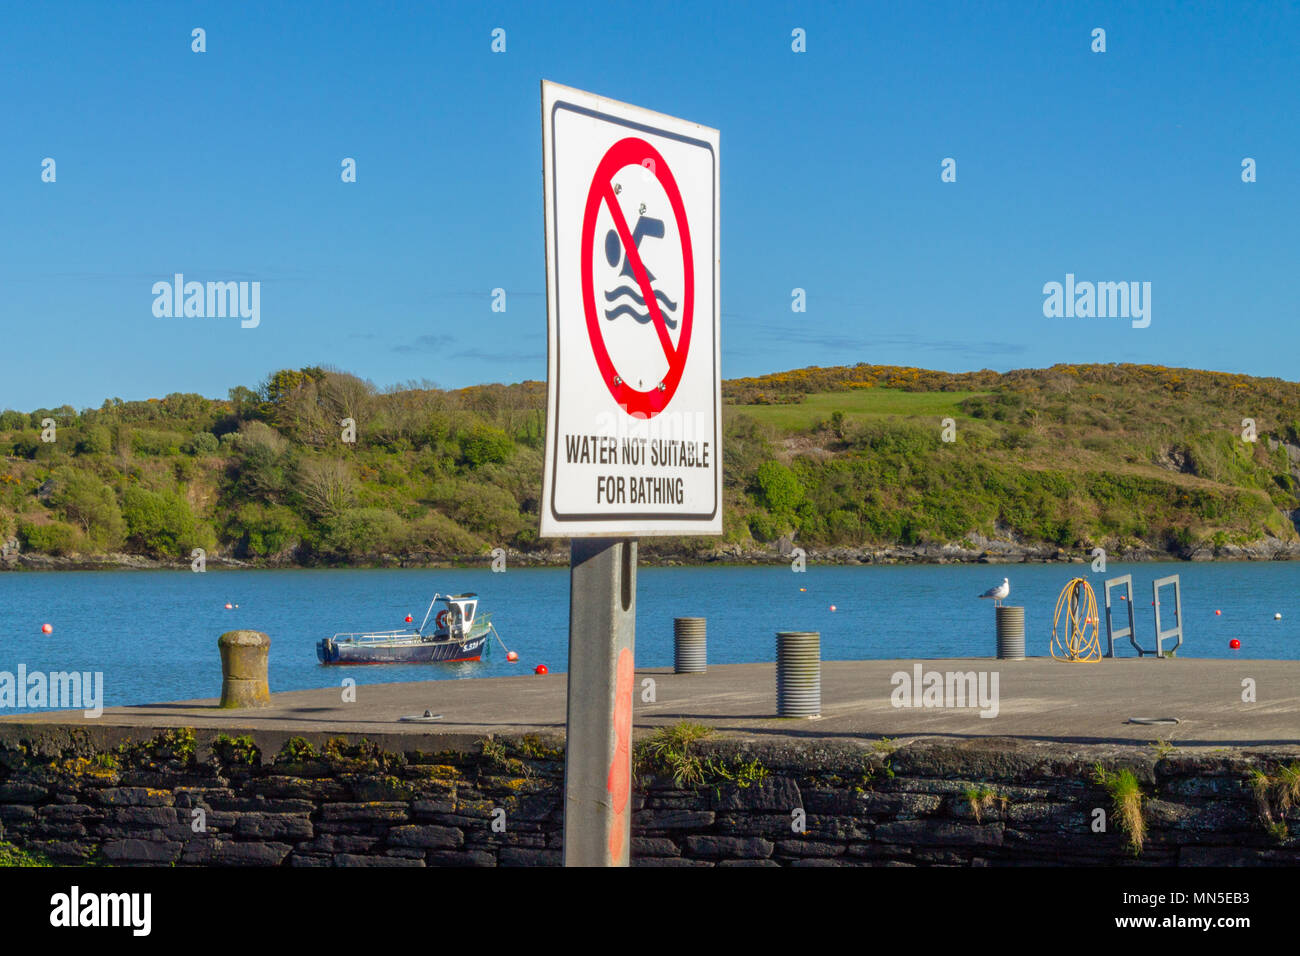 No Bathing sign warning people to stay out of what looks to be clean water due to sewage contamination from untreated outfalls Stock Photo